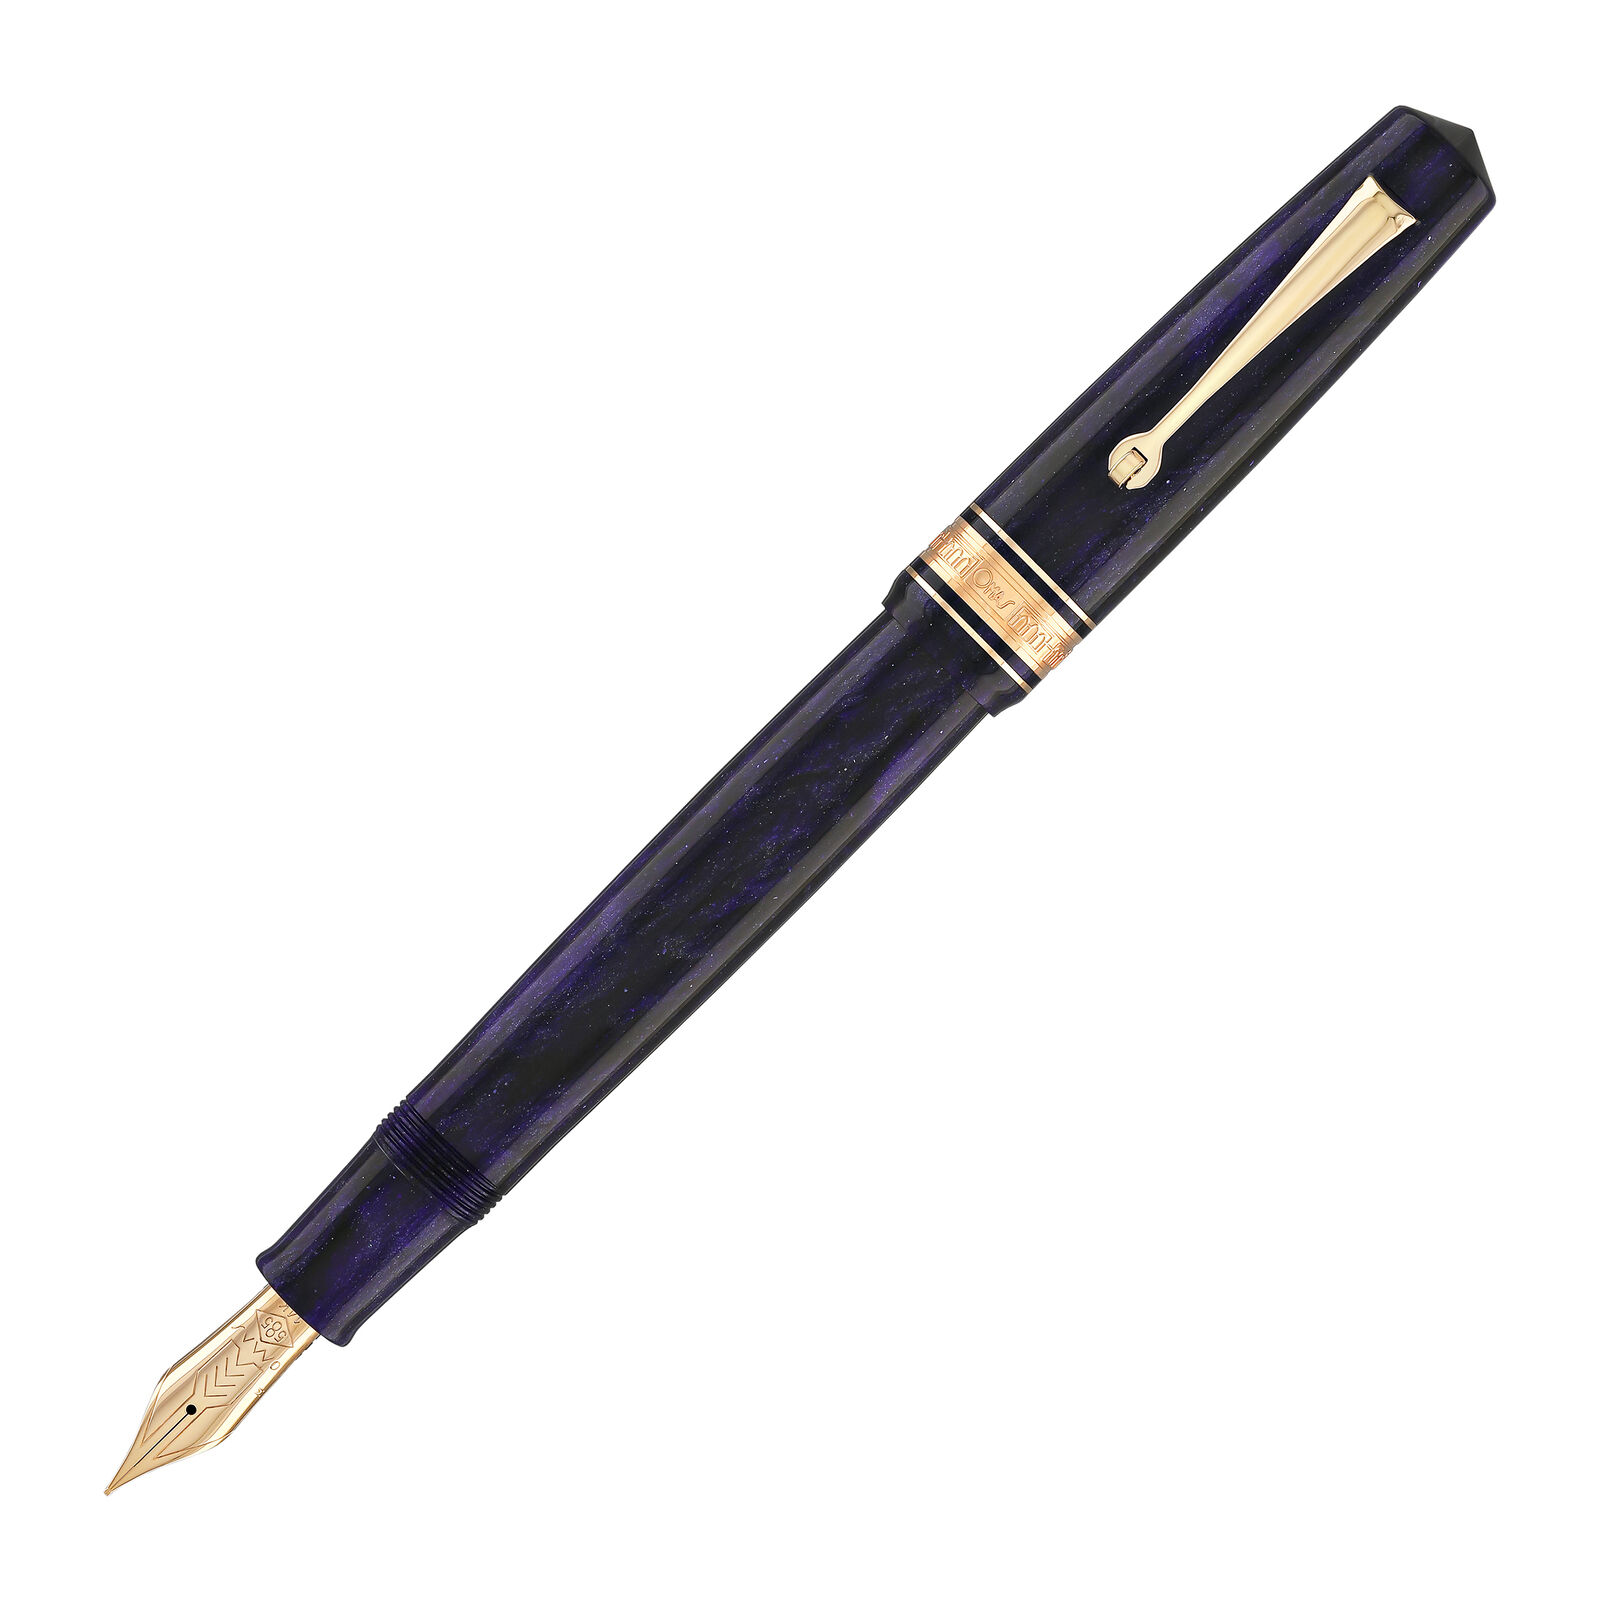 Omas Bologna Fountain Pen in Ametista Profondo with Rose Gold Trim - Broad Point